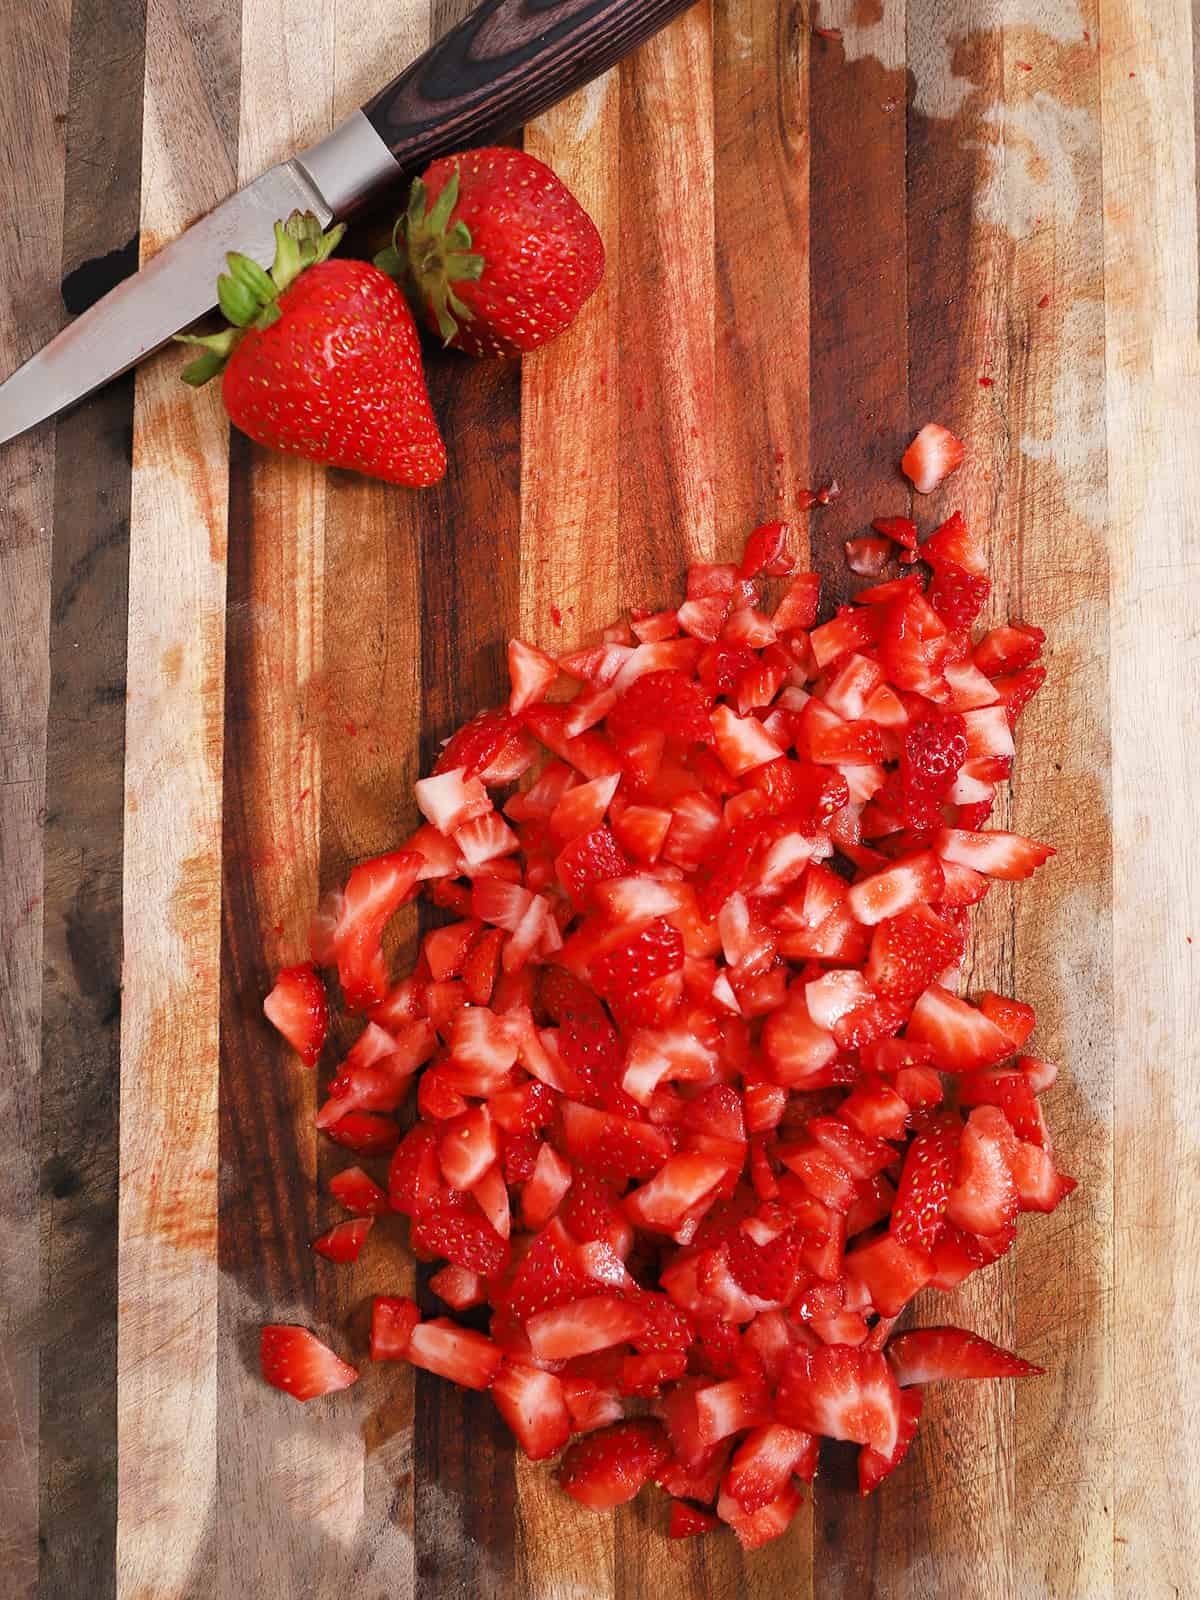 A cutting board full of diced strawberry pieces.